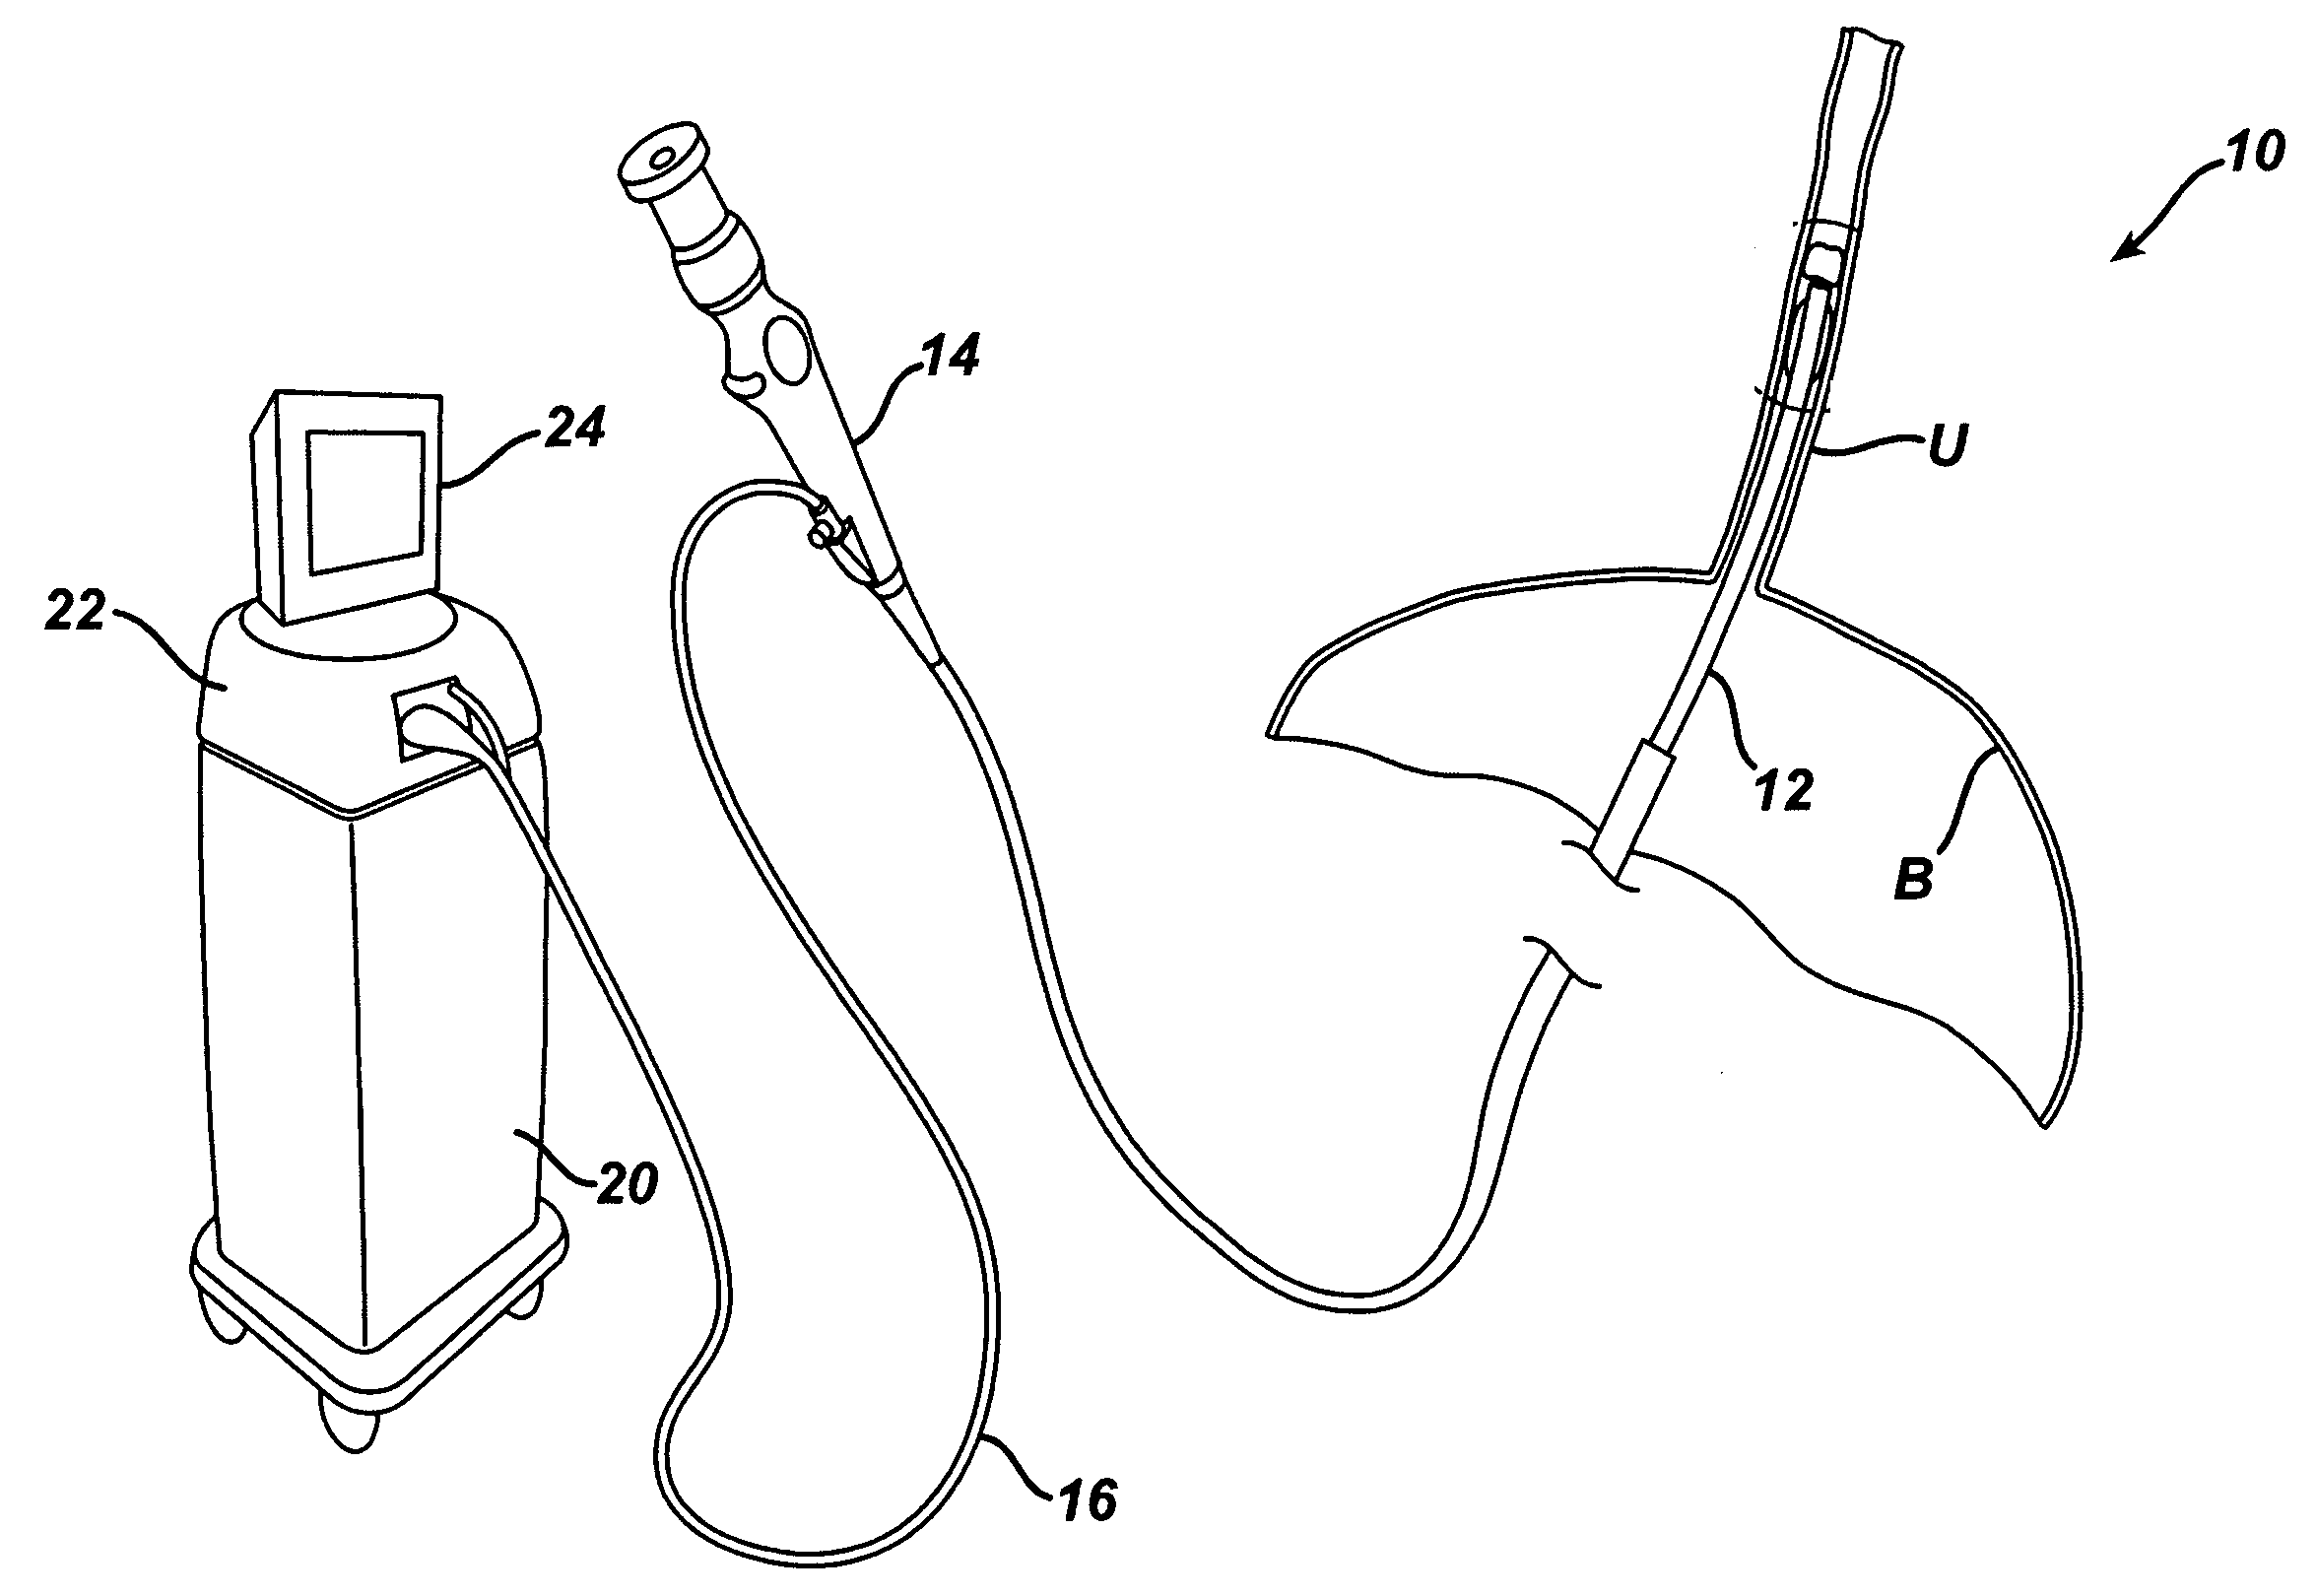 Ultrasonic device and method for treating stones within the body